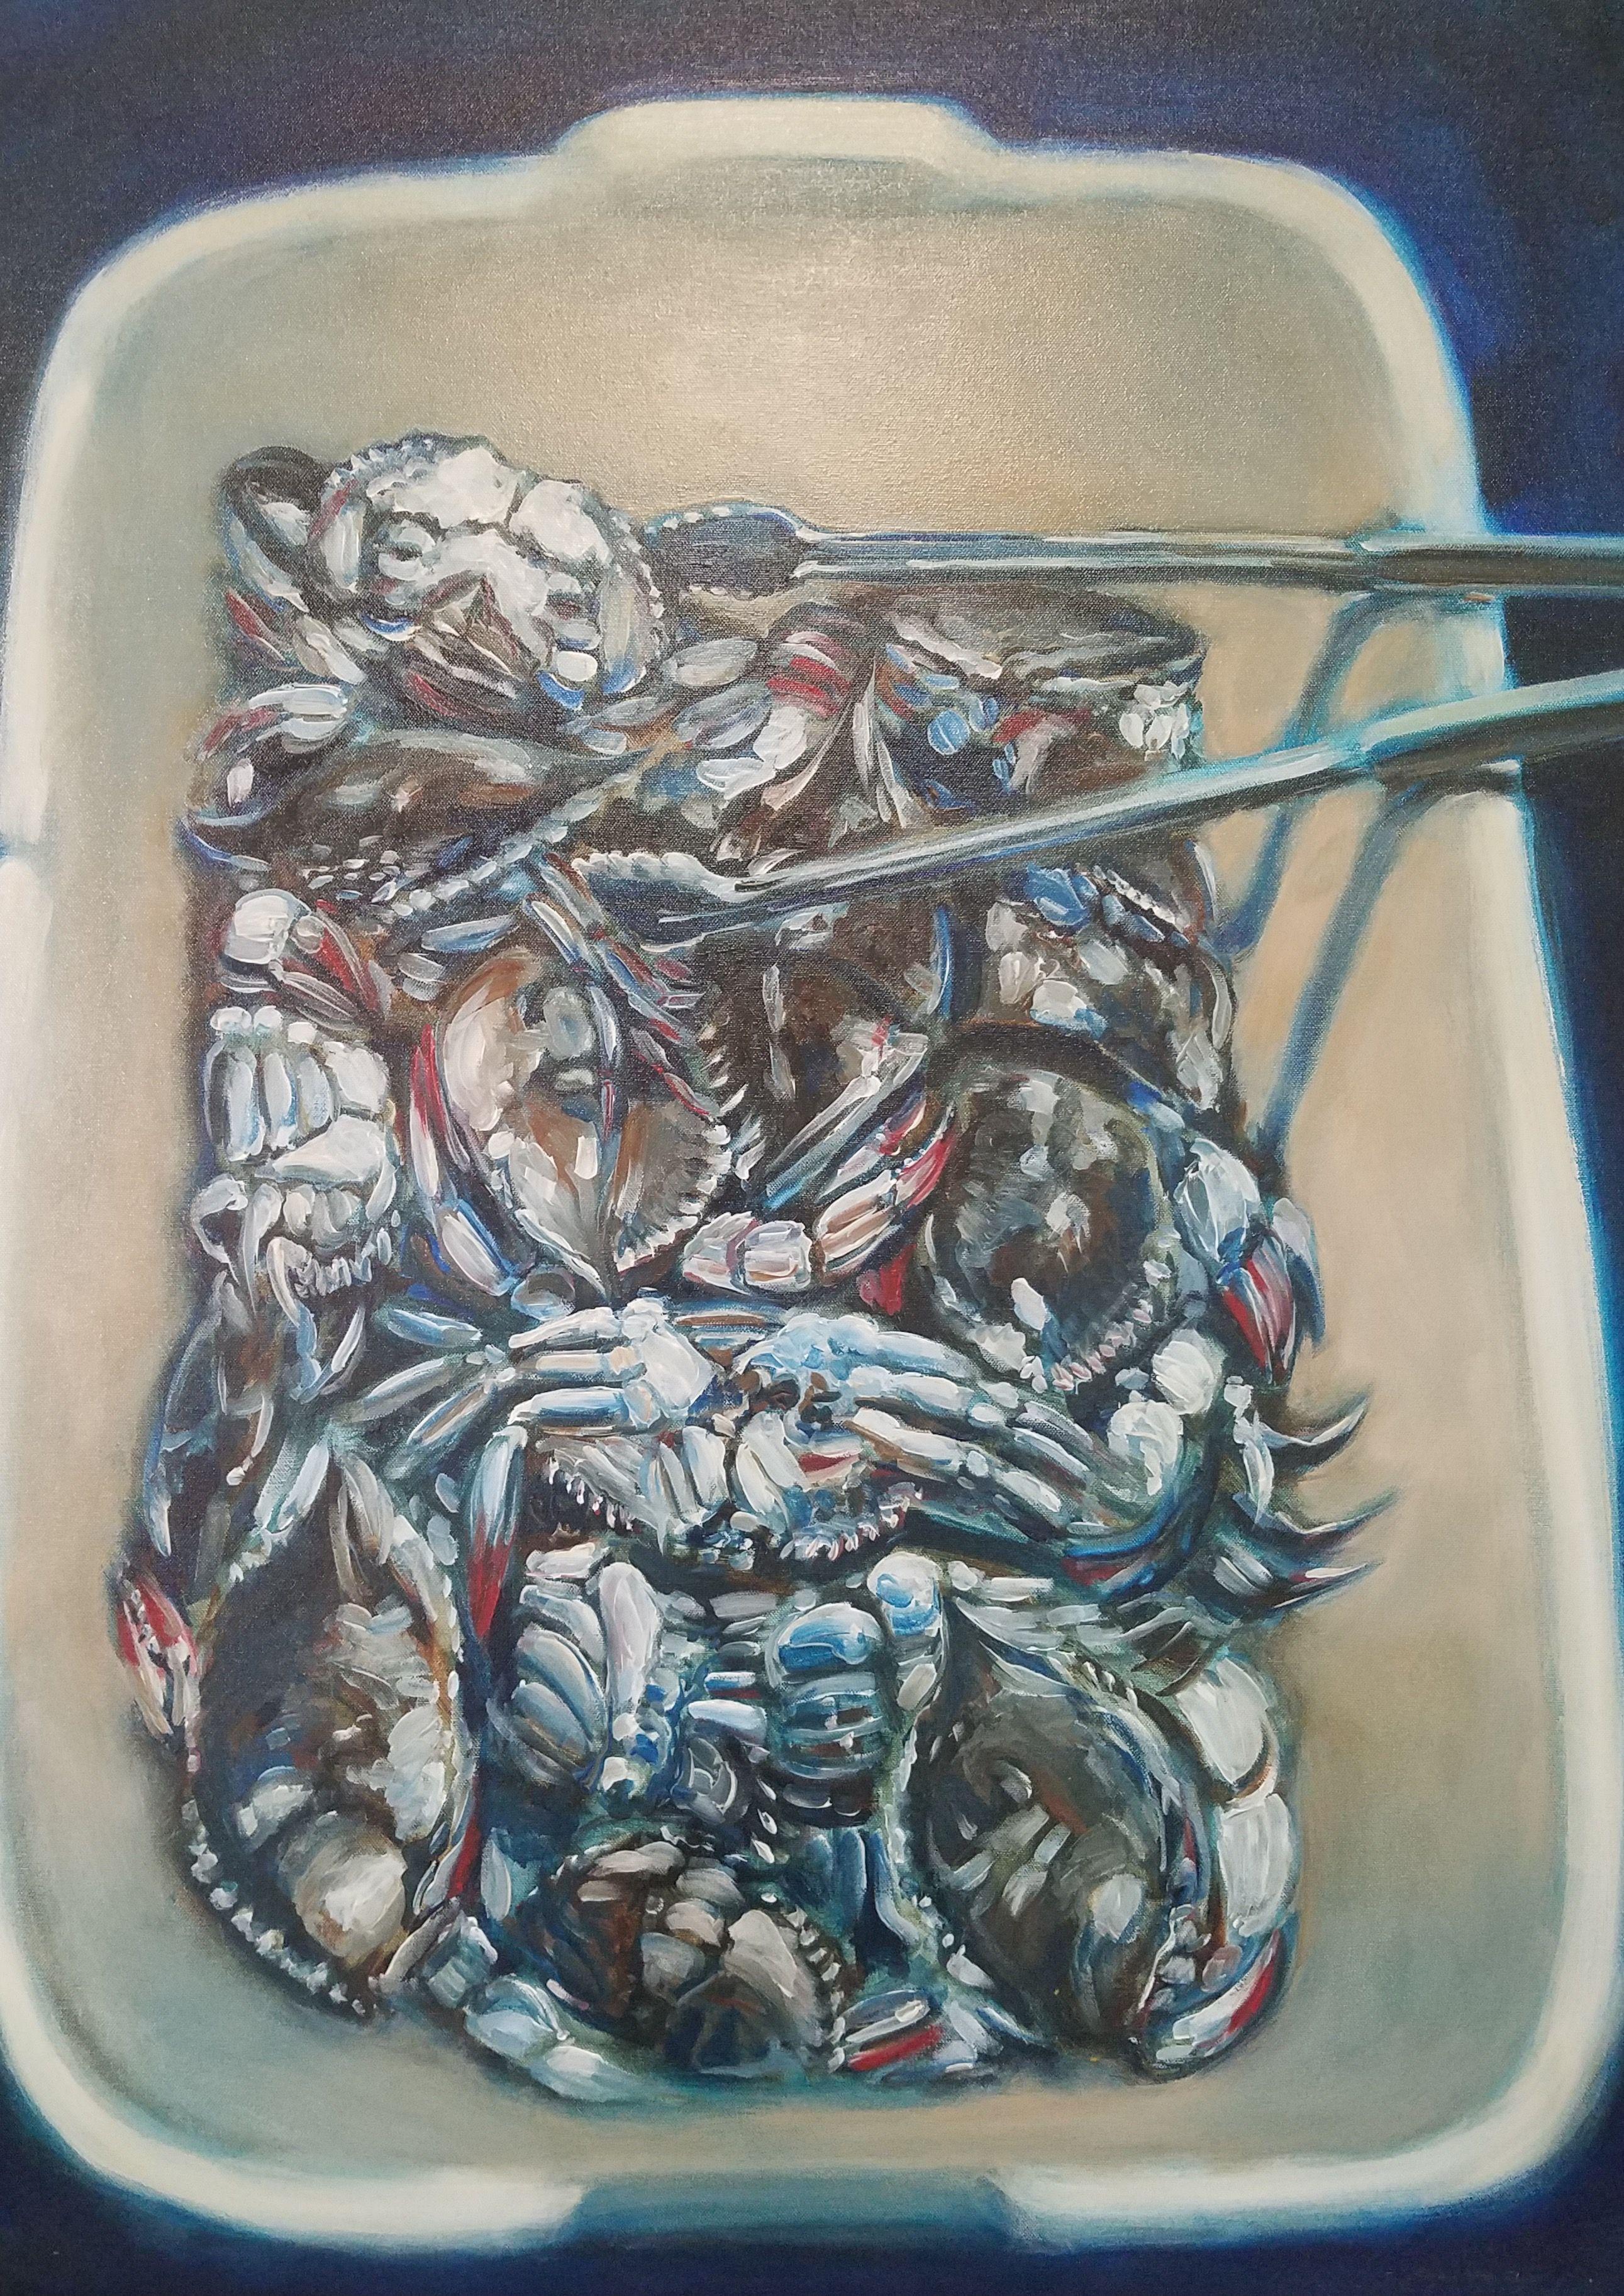 Walking through the local Asian Market.  Browsing the seafood section and I saw these live Blue Crabs in their plastic display bin.  Donâ€™t they seem a little blue to you too? :: Painting :: Impressionist :: This piece comes with an official